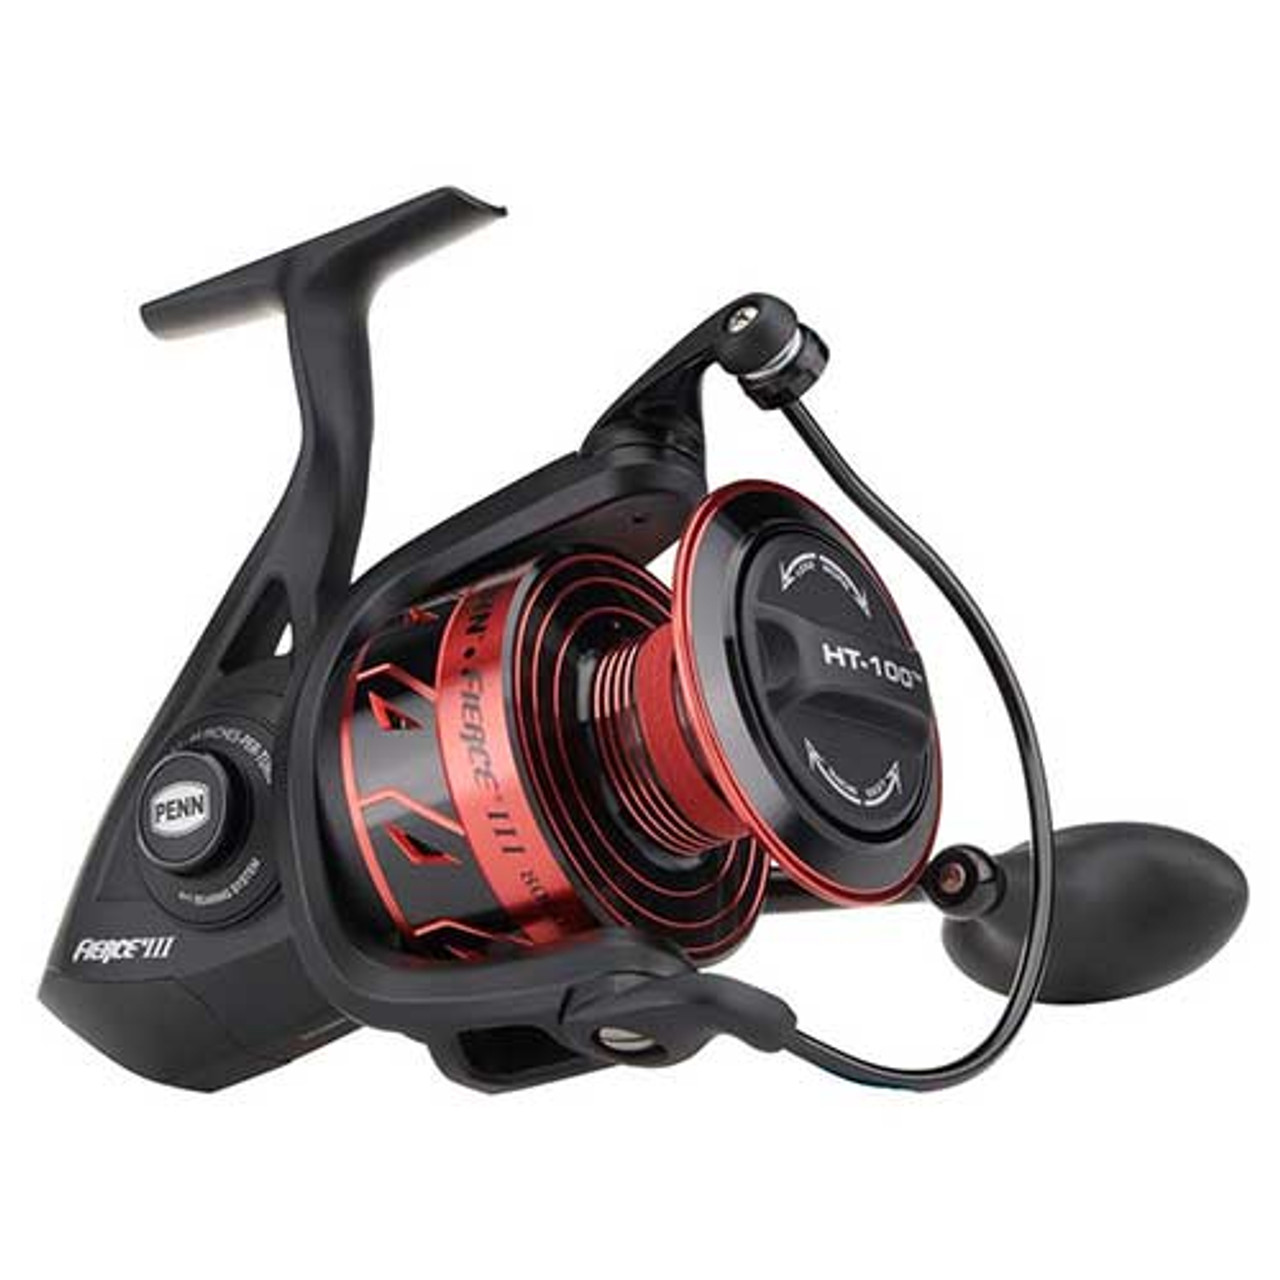 Penn Fierce III Spinning Reel Online of high quality at affordable ...